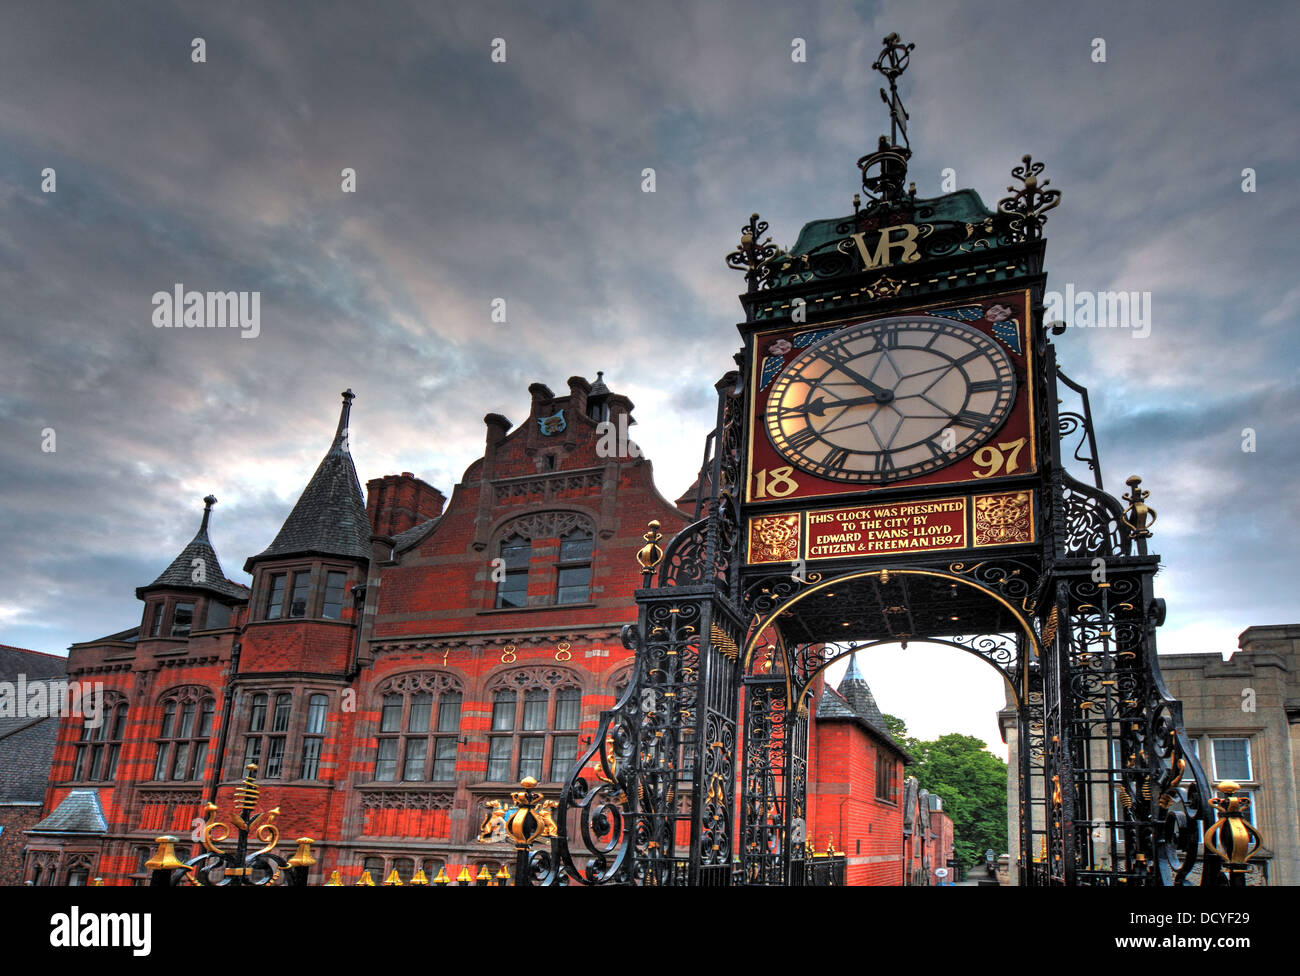 The Eastgate clock, East Gate Chester , Cheshire, England UK Stock Photo